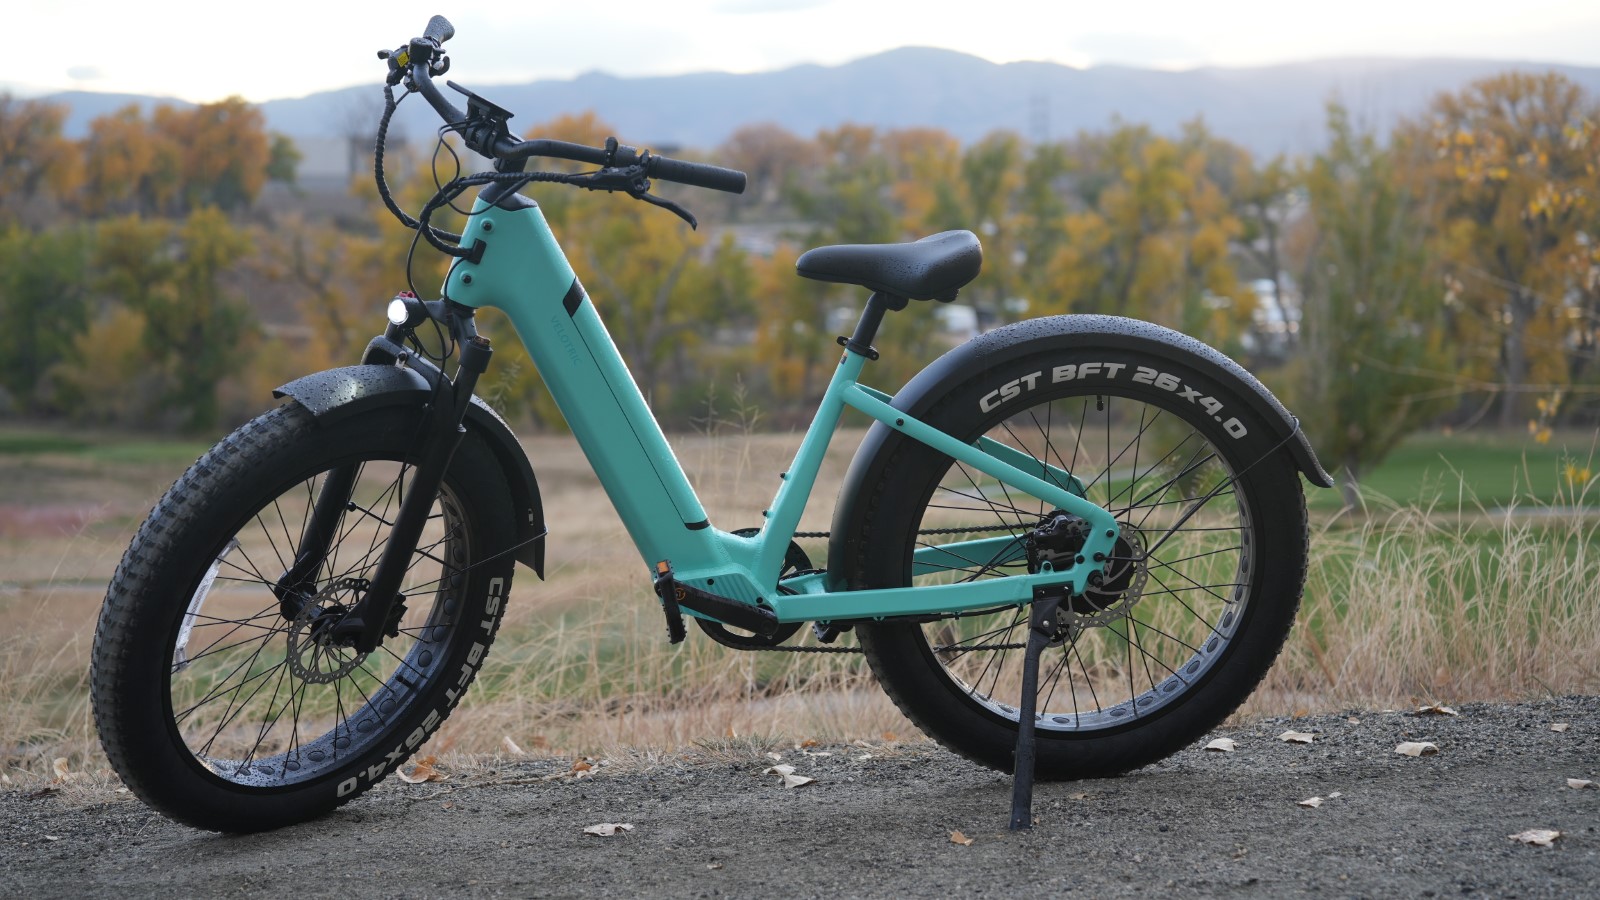 Velotric Nomad 1 electric bike review: Tackle any terrain in